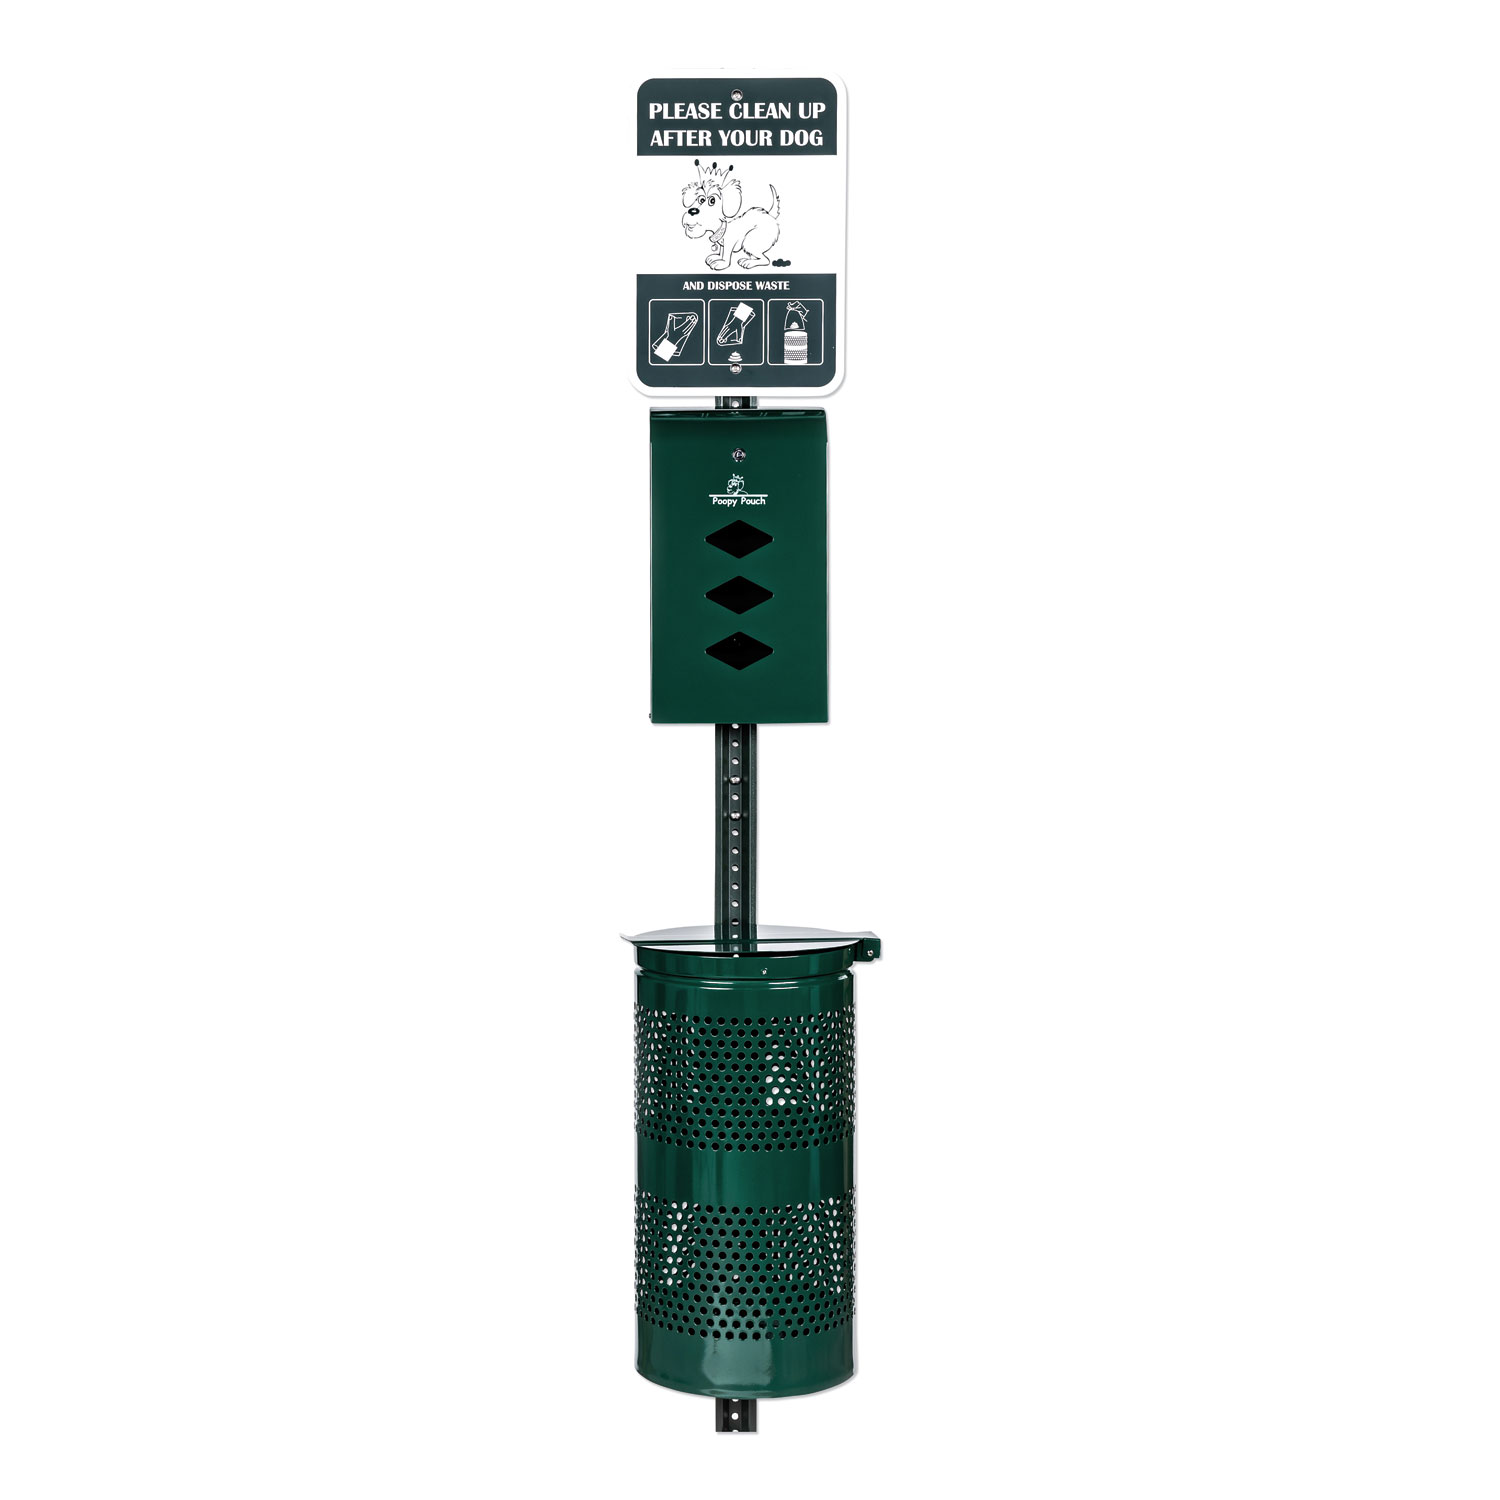  Poopy Pouch PP-SD-01-3R200 Monarch Pet Waste Station, 12 x 14 x 96, Hunter Green (CWDPPSD013R200) 